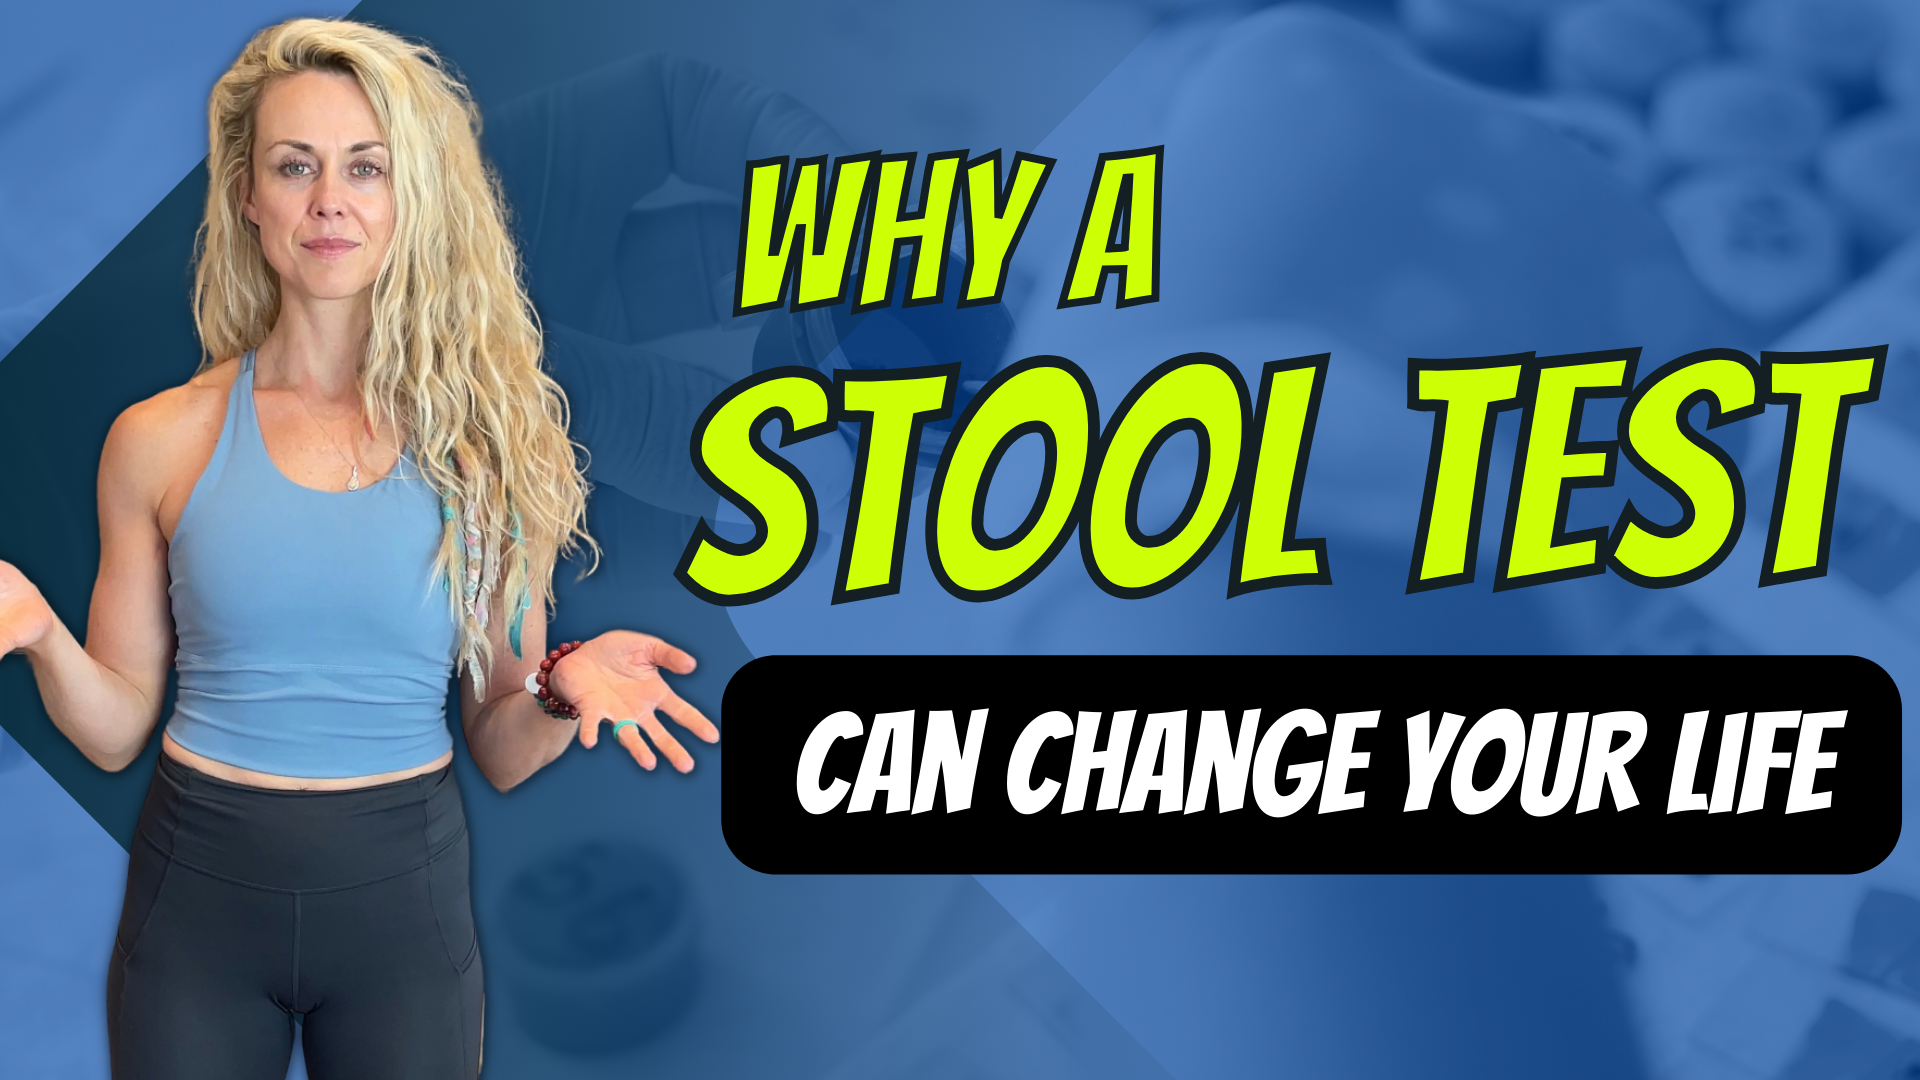 Why a Stool Test Can Change Your Life